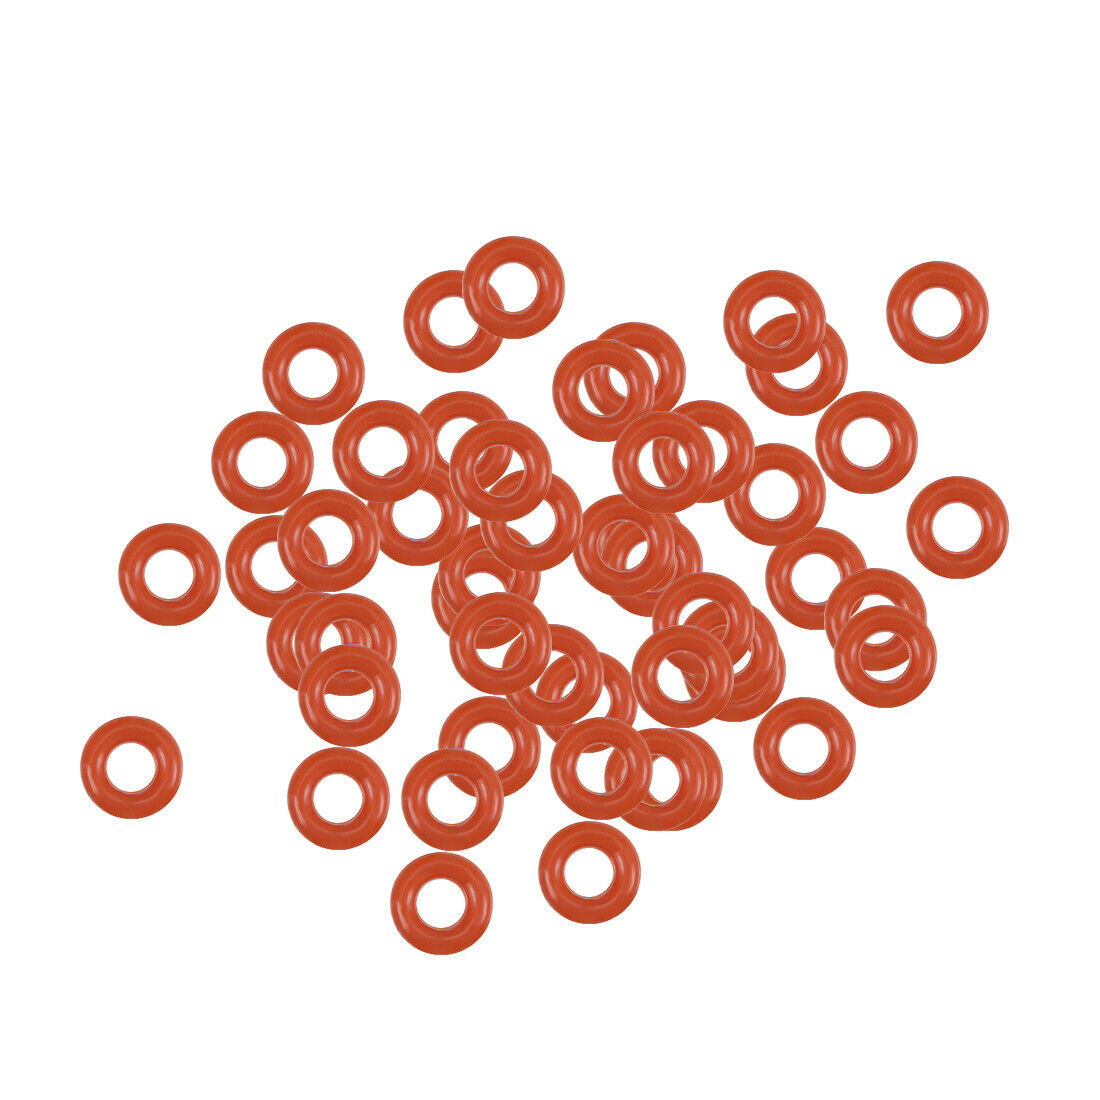 50pcs Silicone O-Ring 4mm OD 2mm ID 1mm Width VMQ Seal Rings Gasket Red